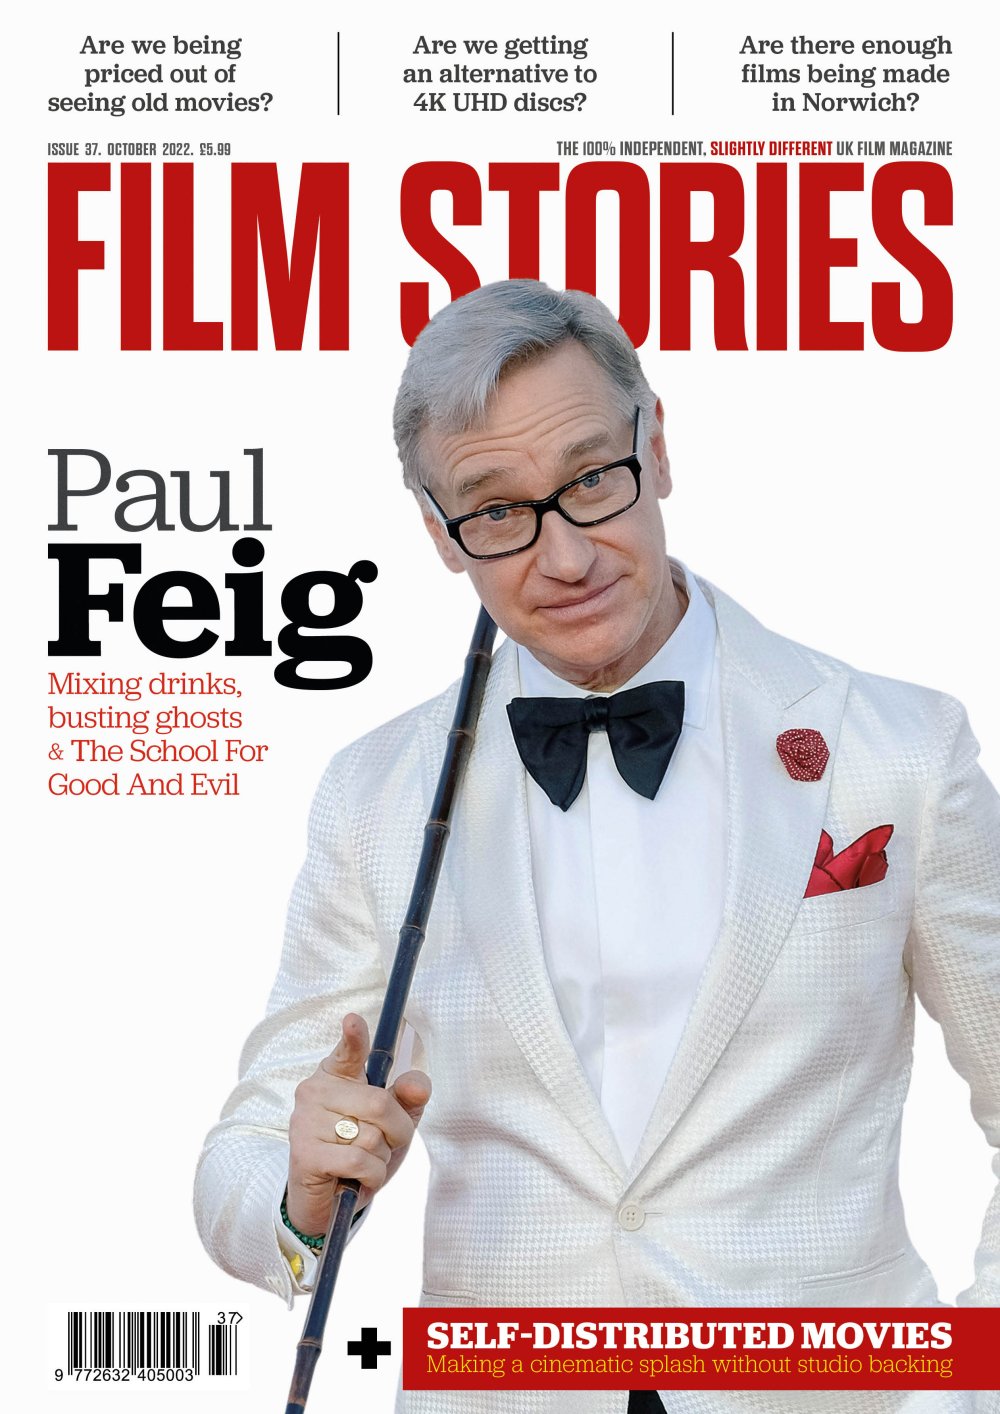 Film Stories issue 37 print edition (October 2022)